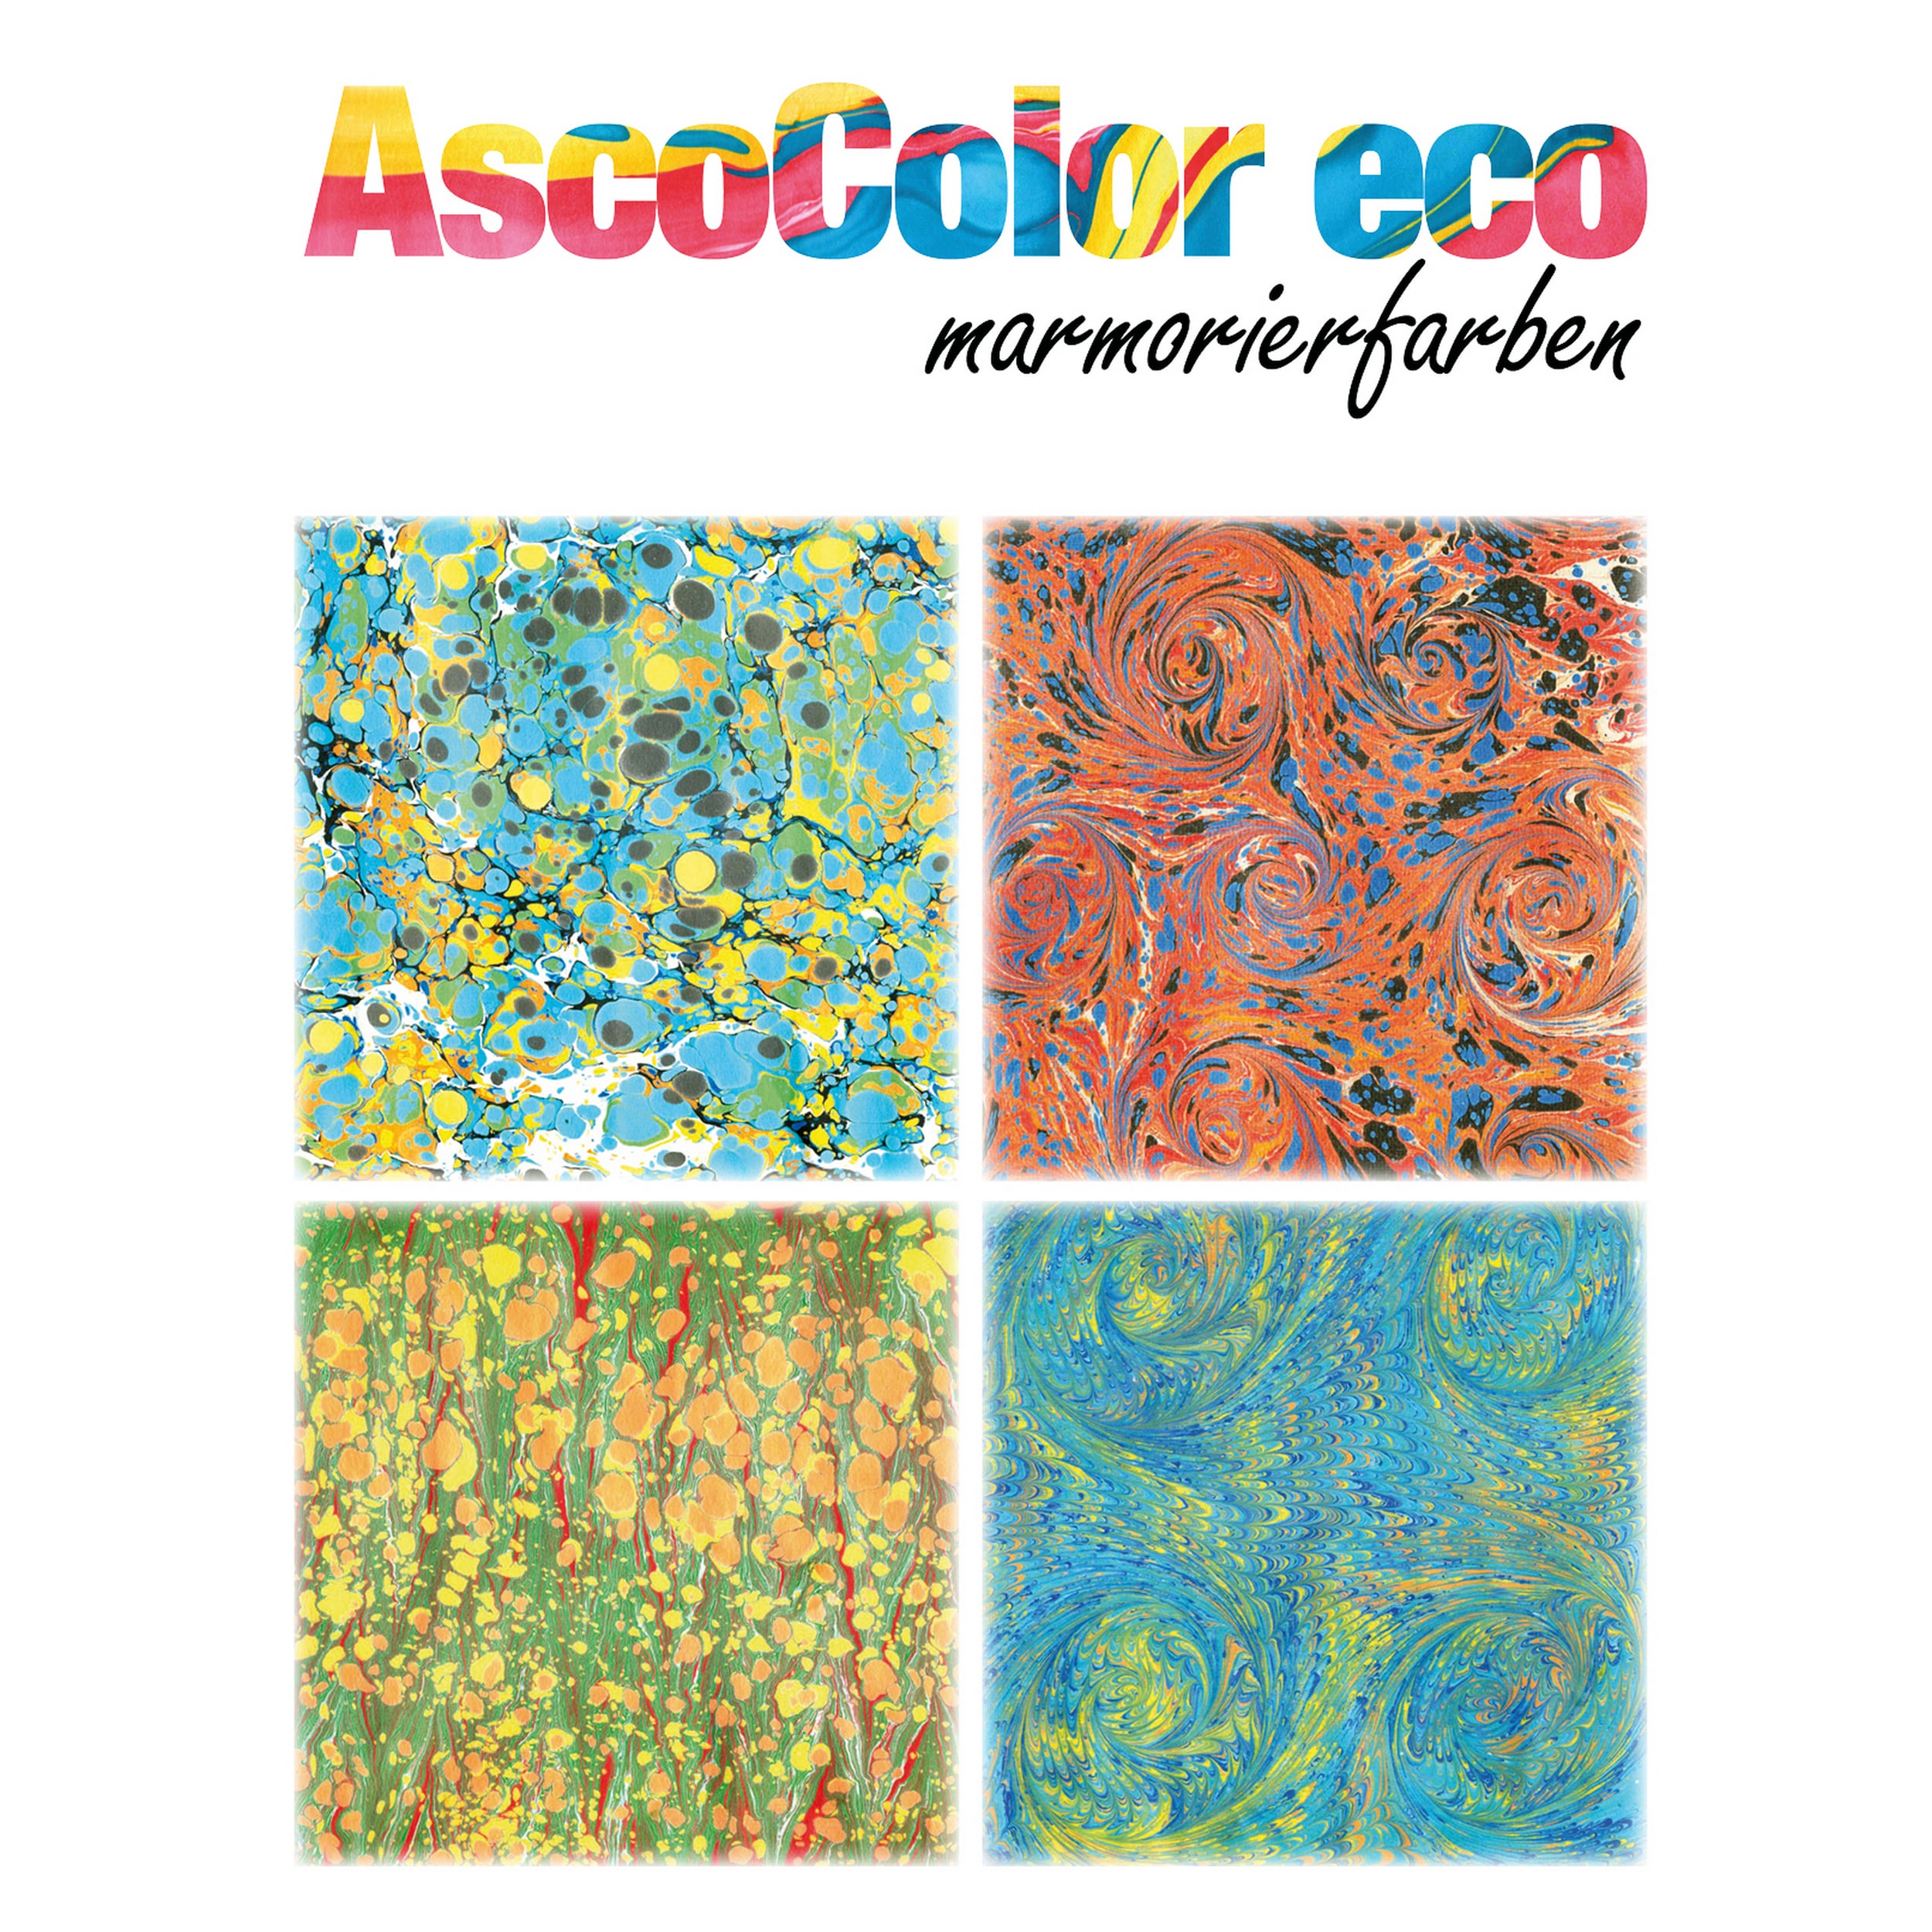 AscoColor eco - Marbling dye - Water-based acrylic dyes with organic pigments - to produce marbled papers... - image-1